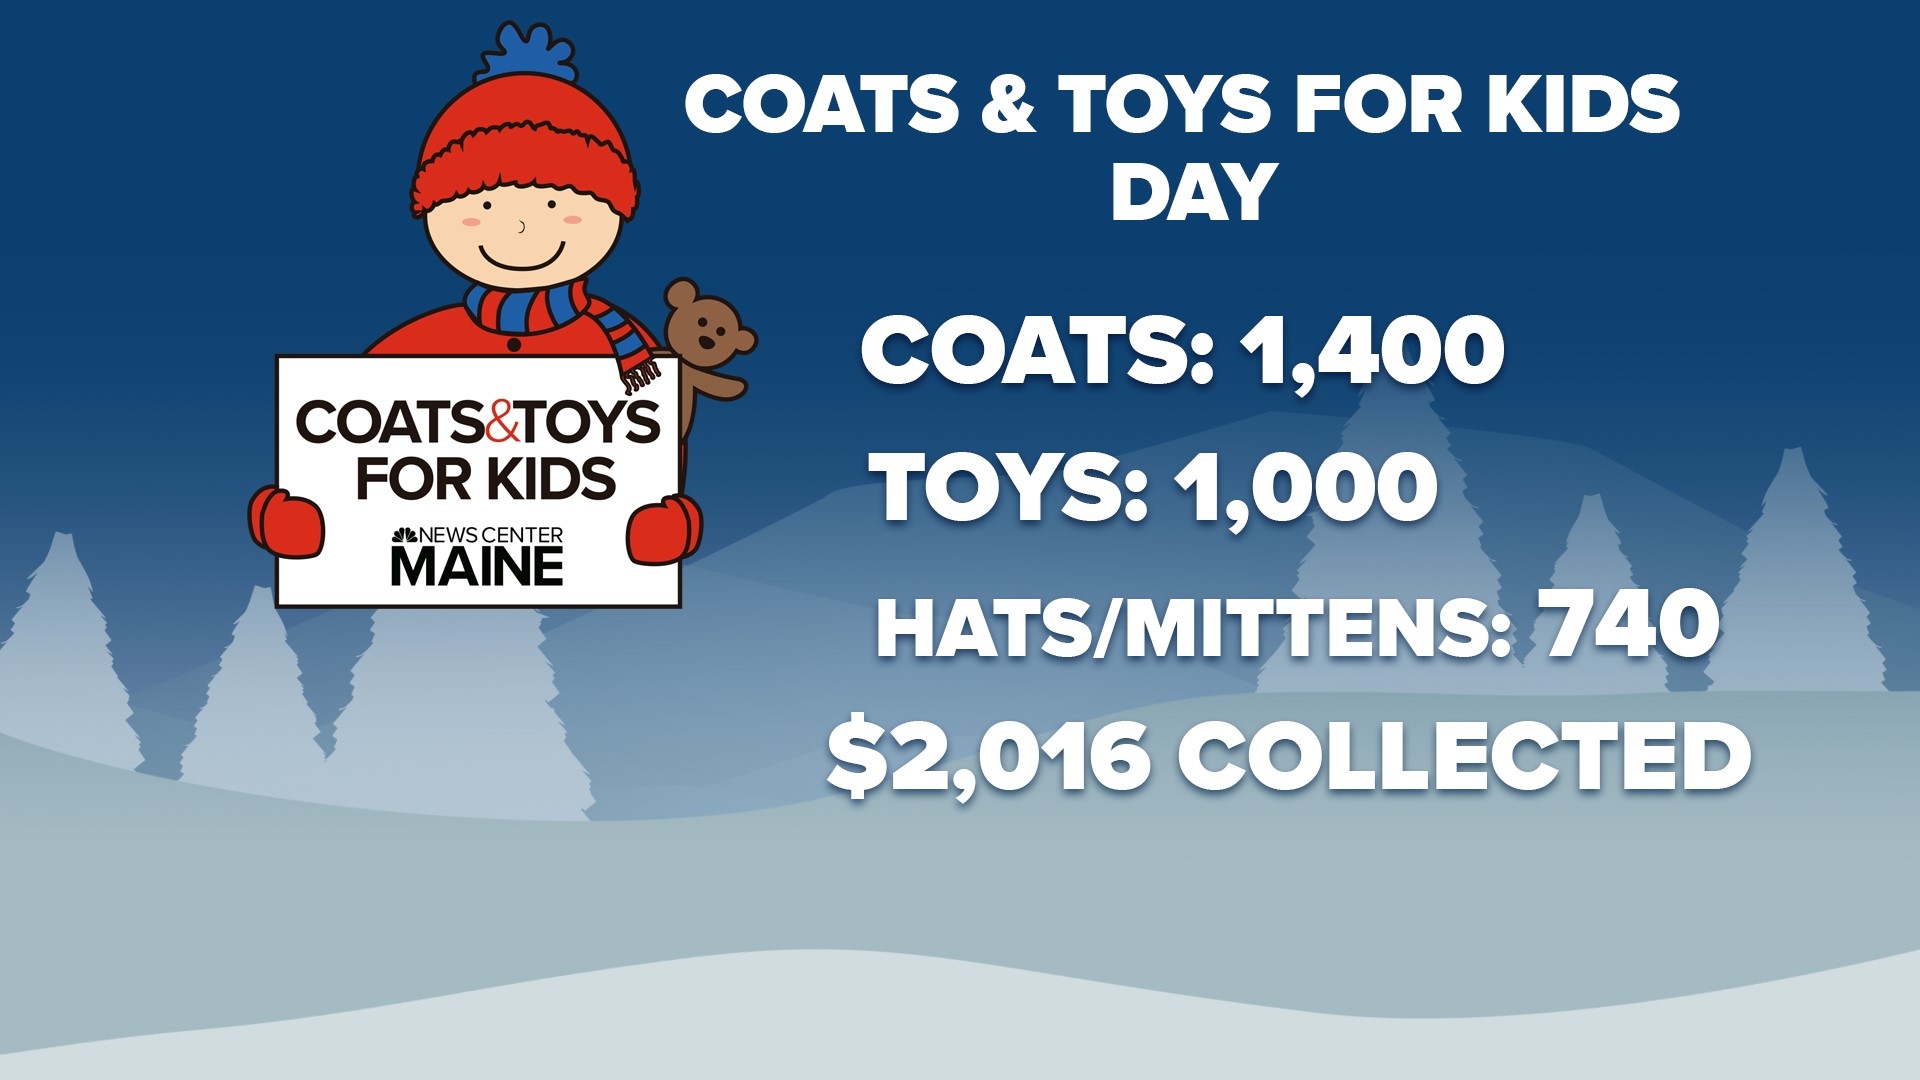 Thank you, Maine for donating over 1,000 coats and toys for Coats and Toys for Kids Day 2023.